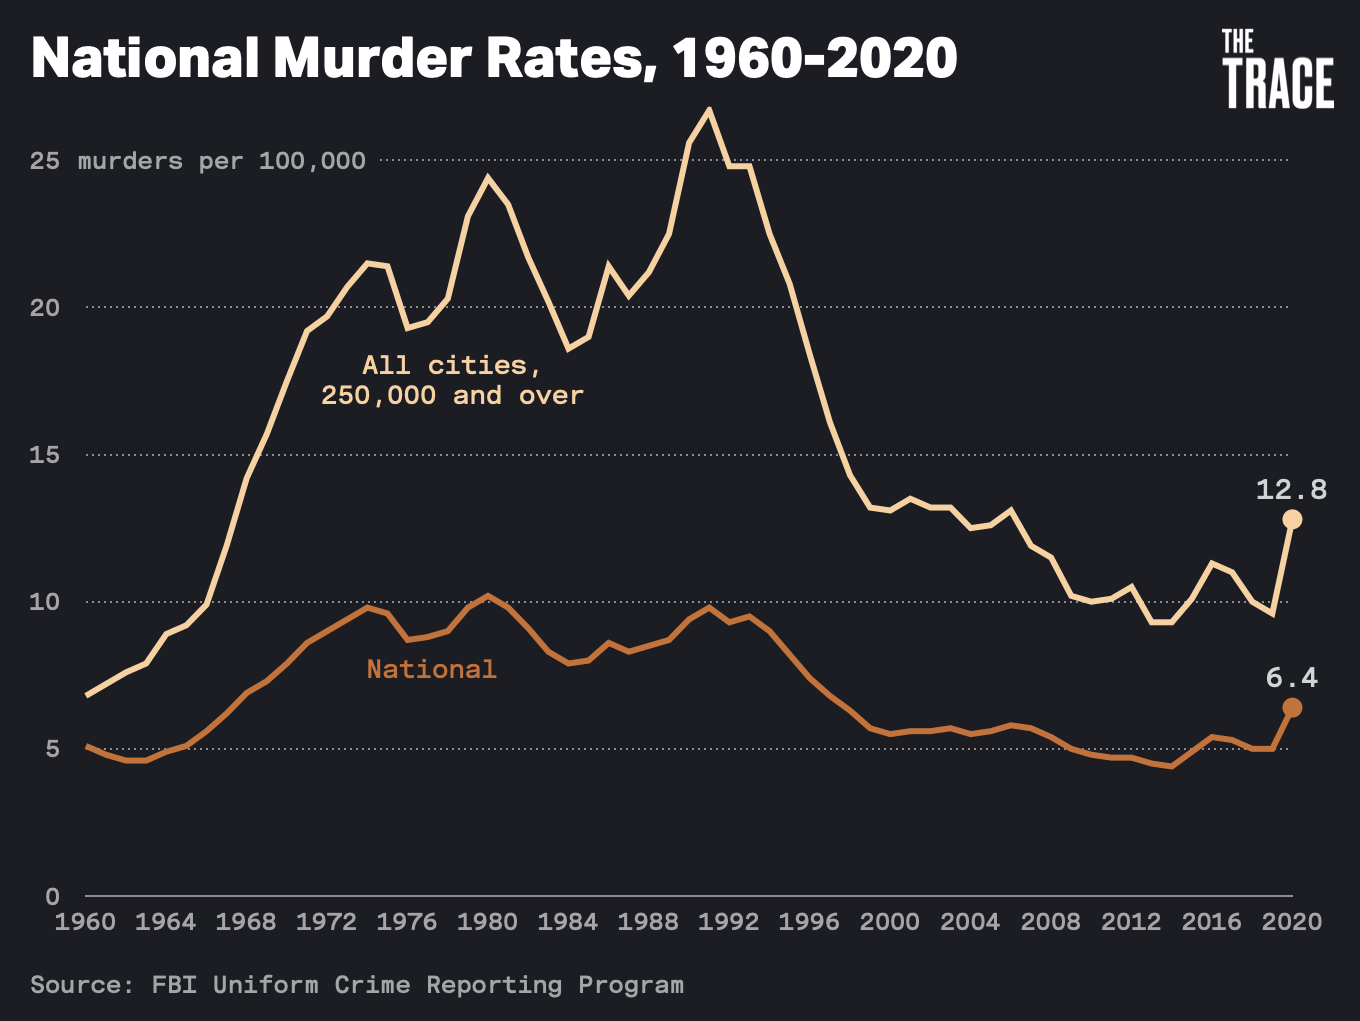 A line chart shows the murder rate for the United States and cities over 250,000 people. Both increased sharply in 2020.